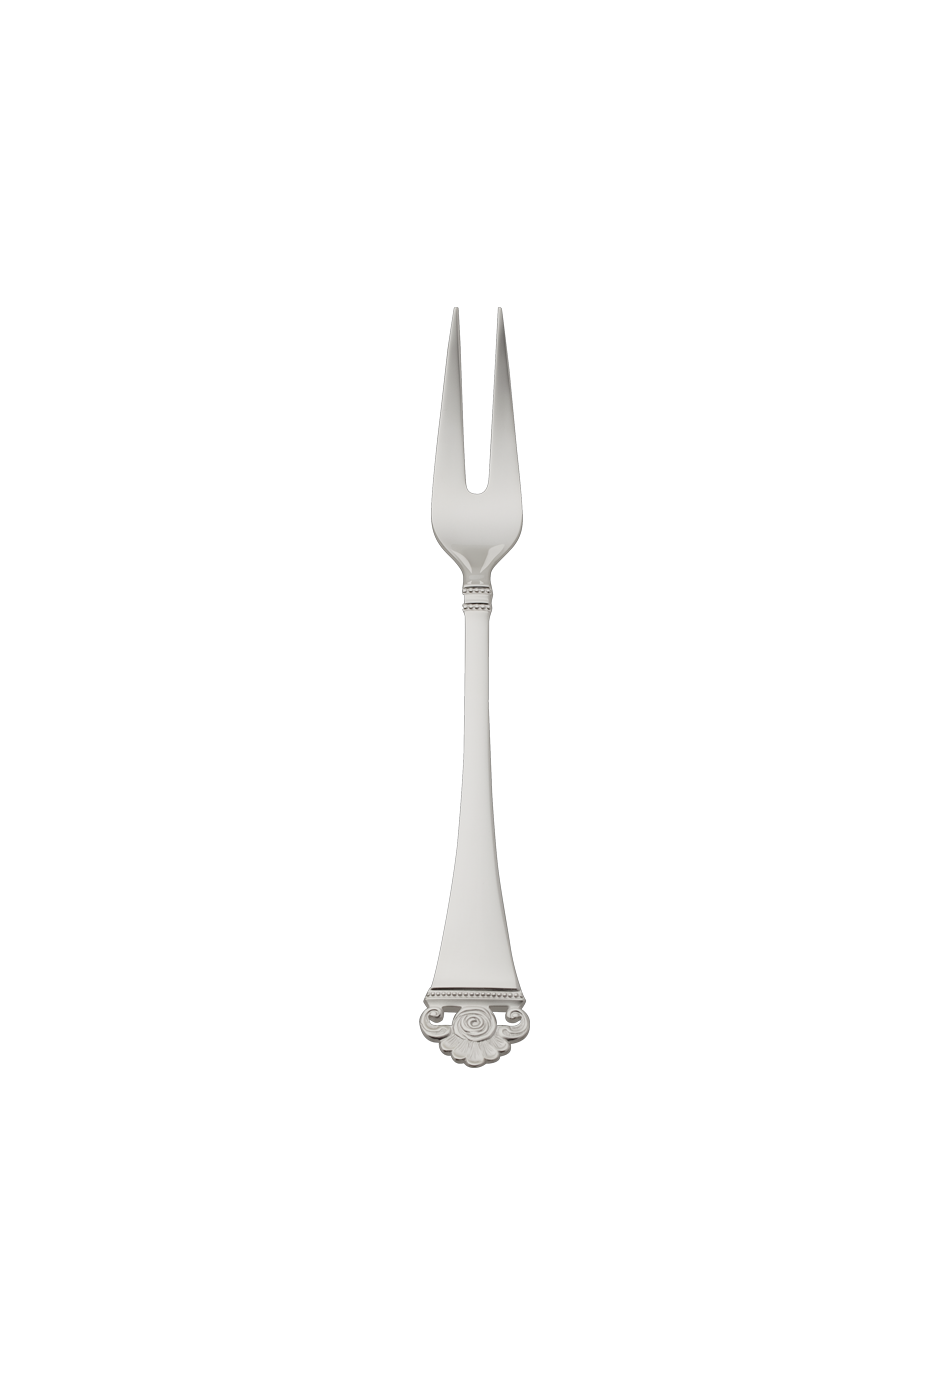 Rosenmuster Meat Fork, large (150g massive silverplated)